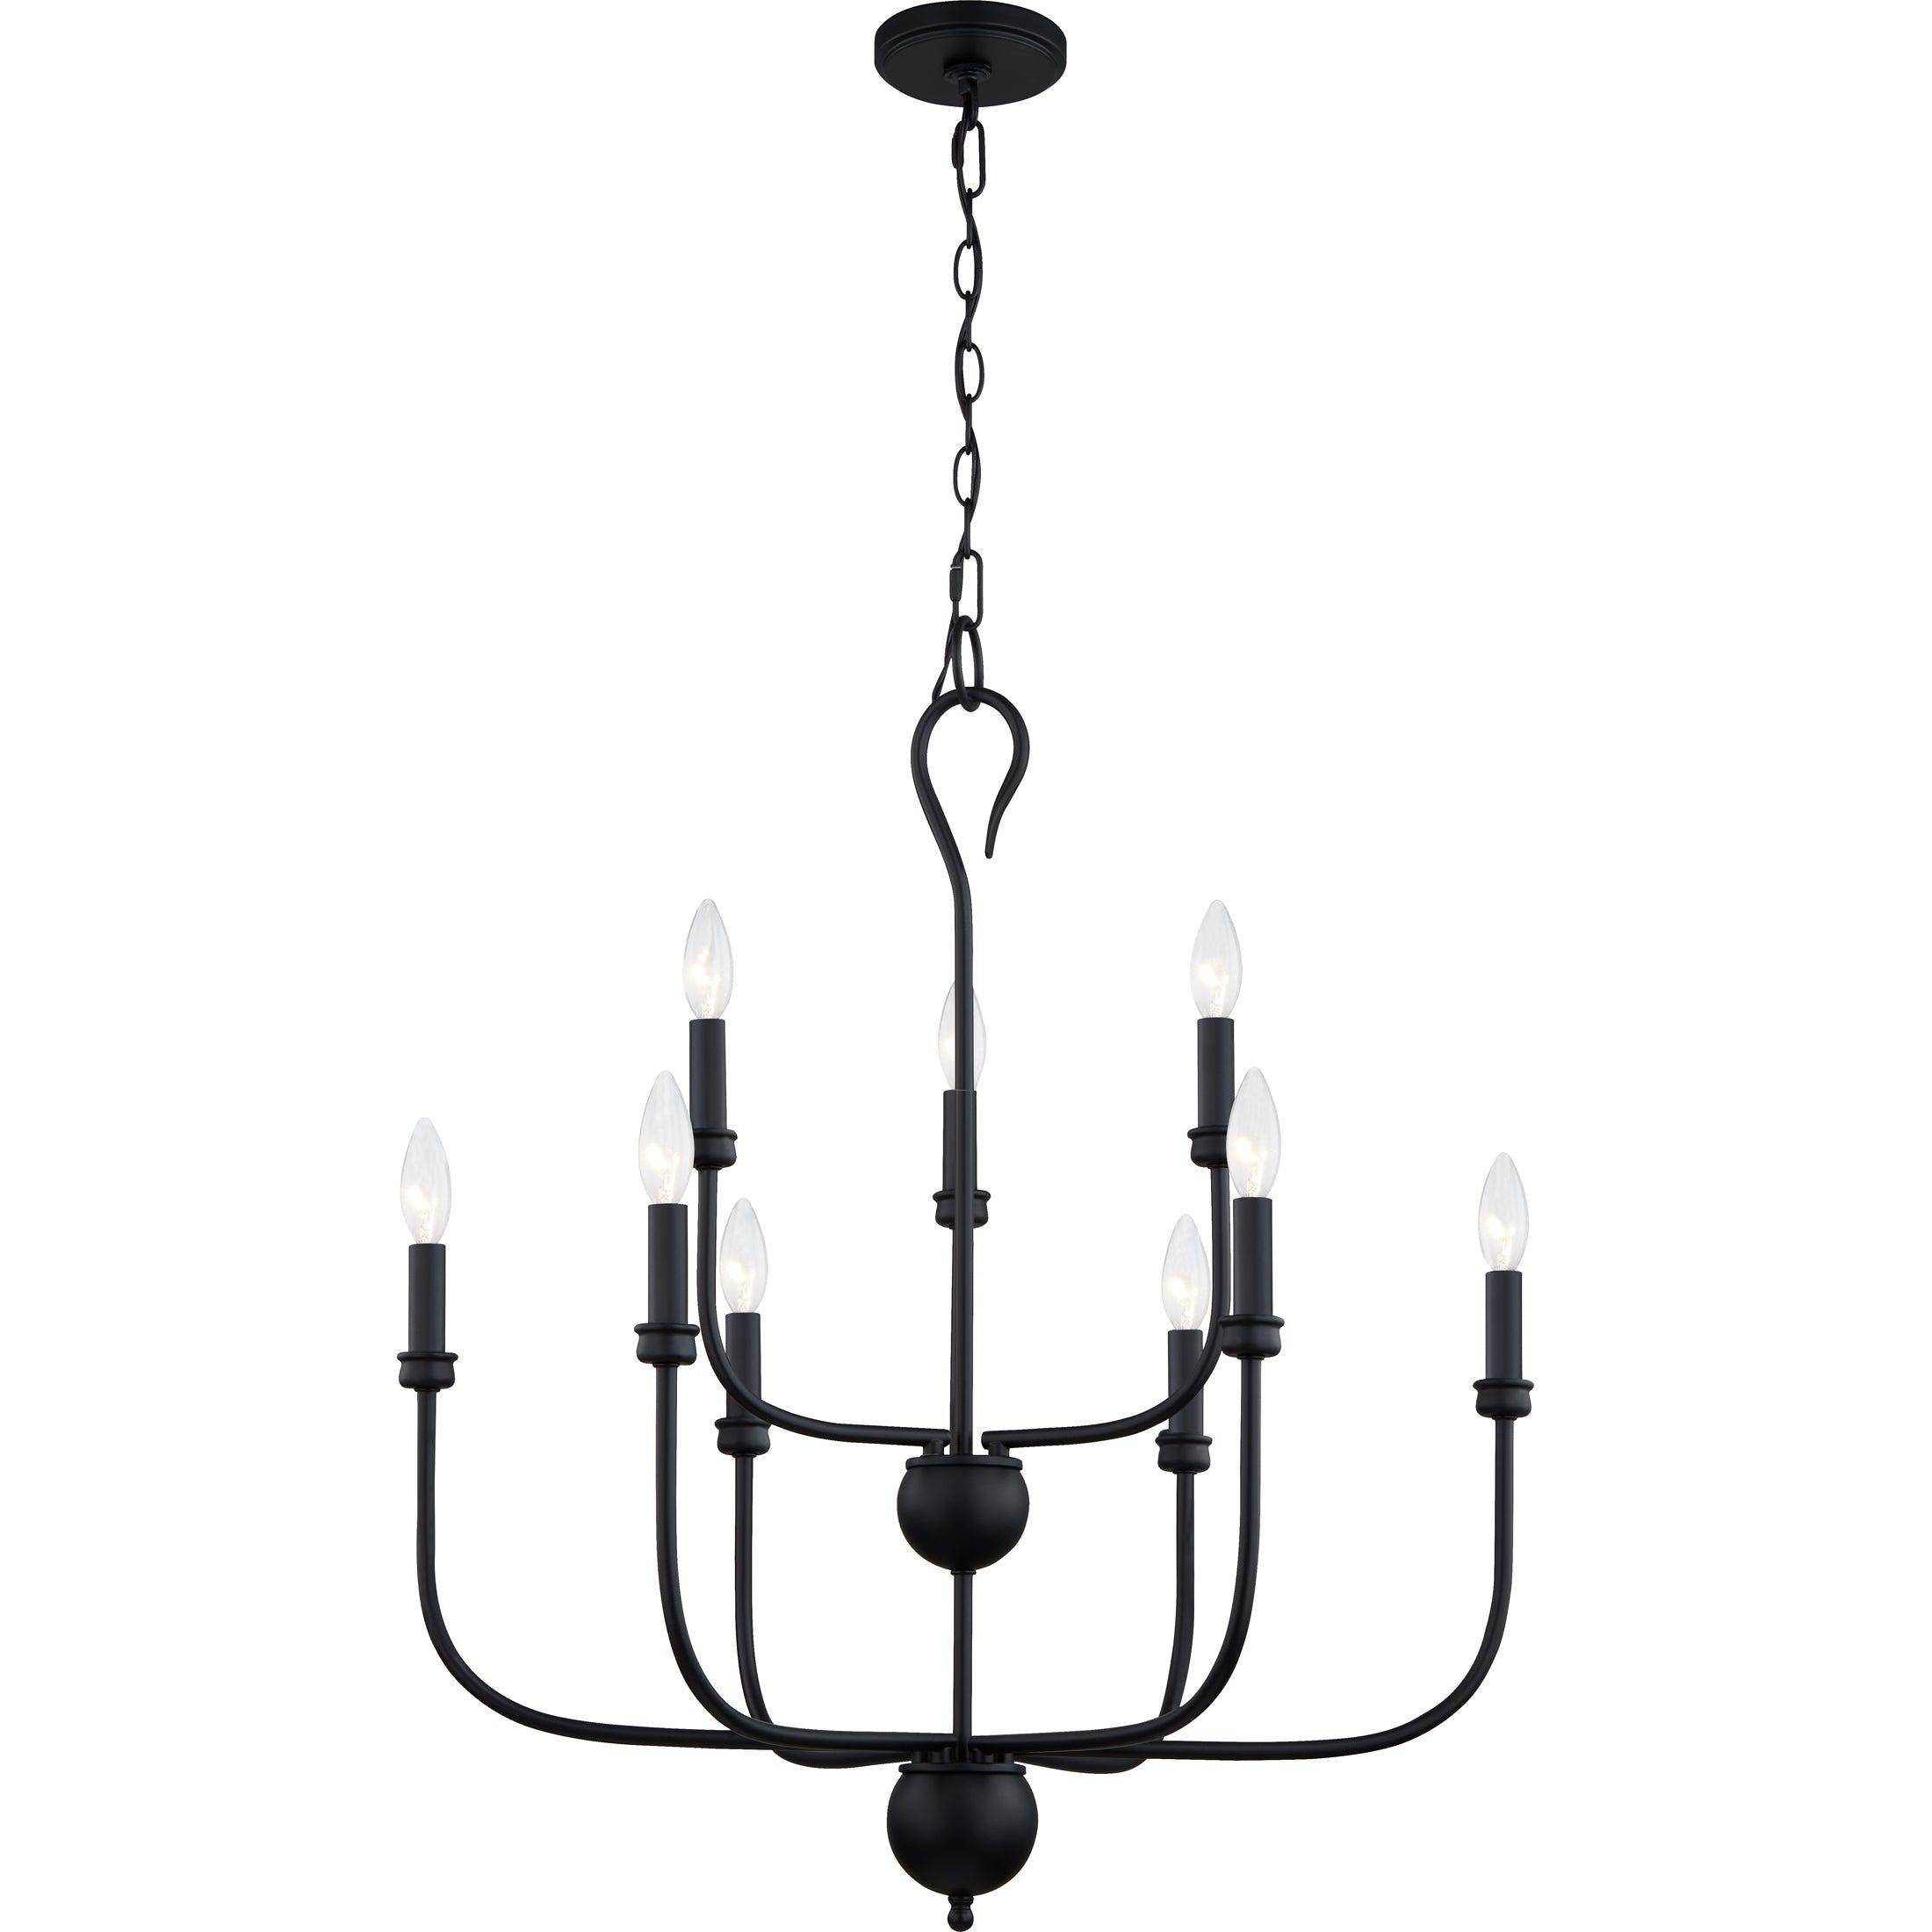 Quoizel - Blanche Chandelier - Lights Canada